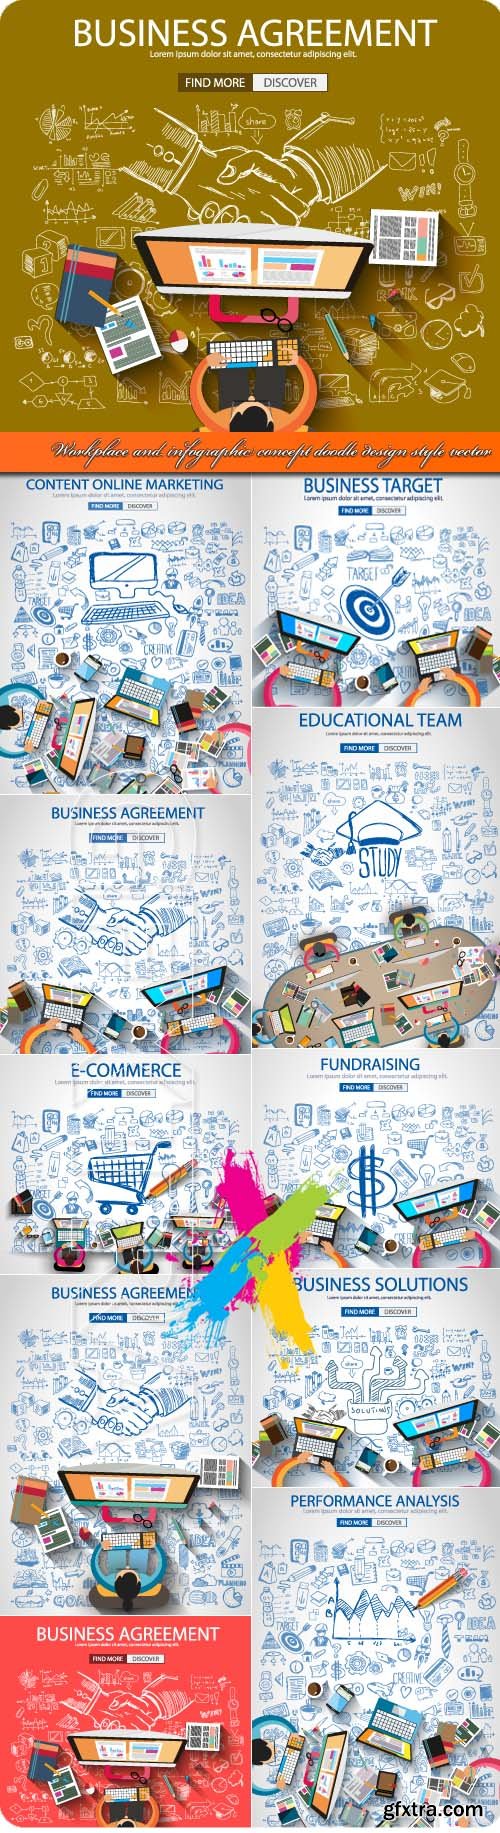 Workplace and infographic concept doodle design style vector